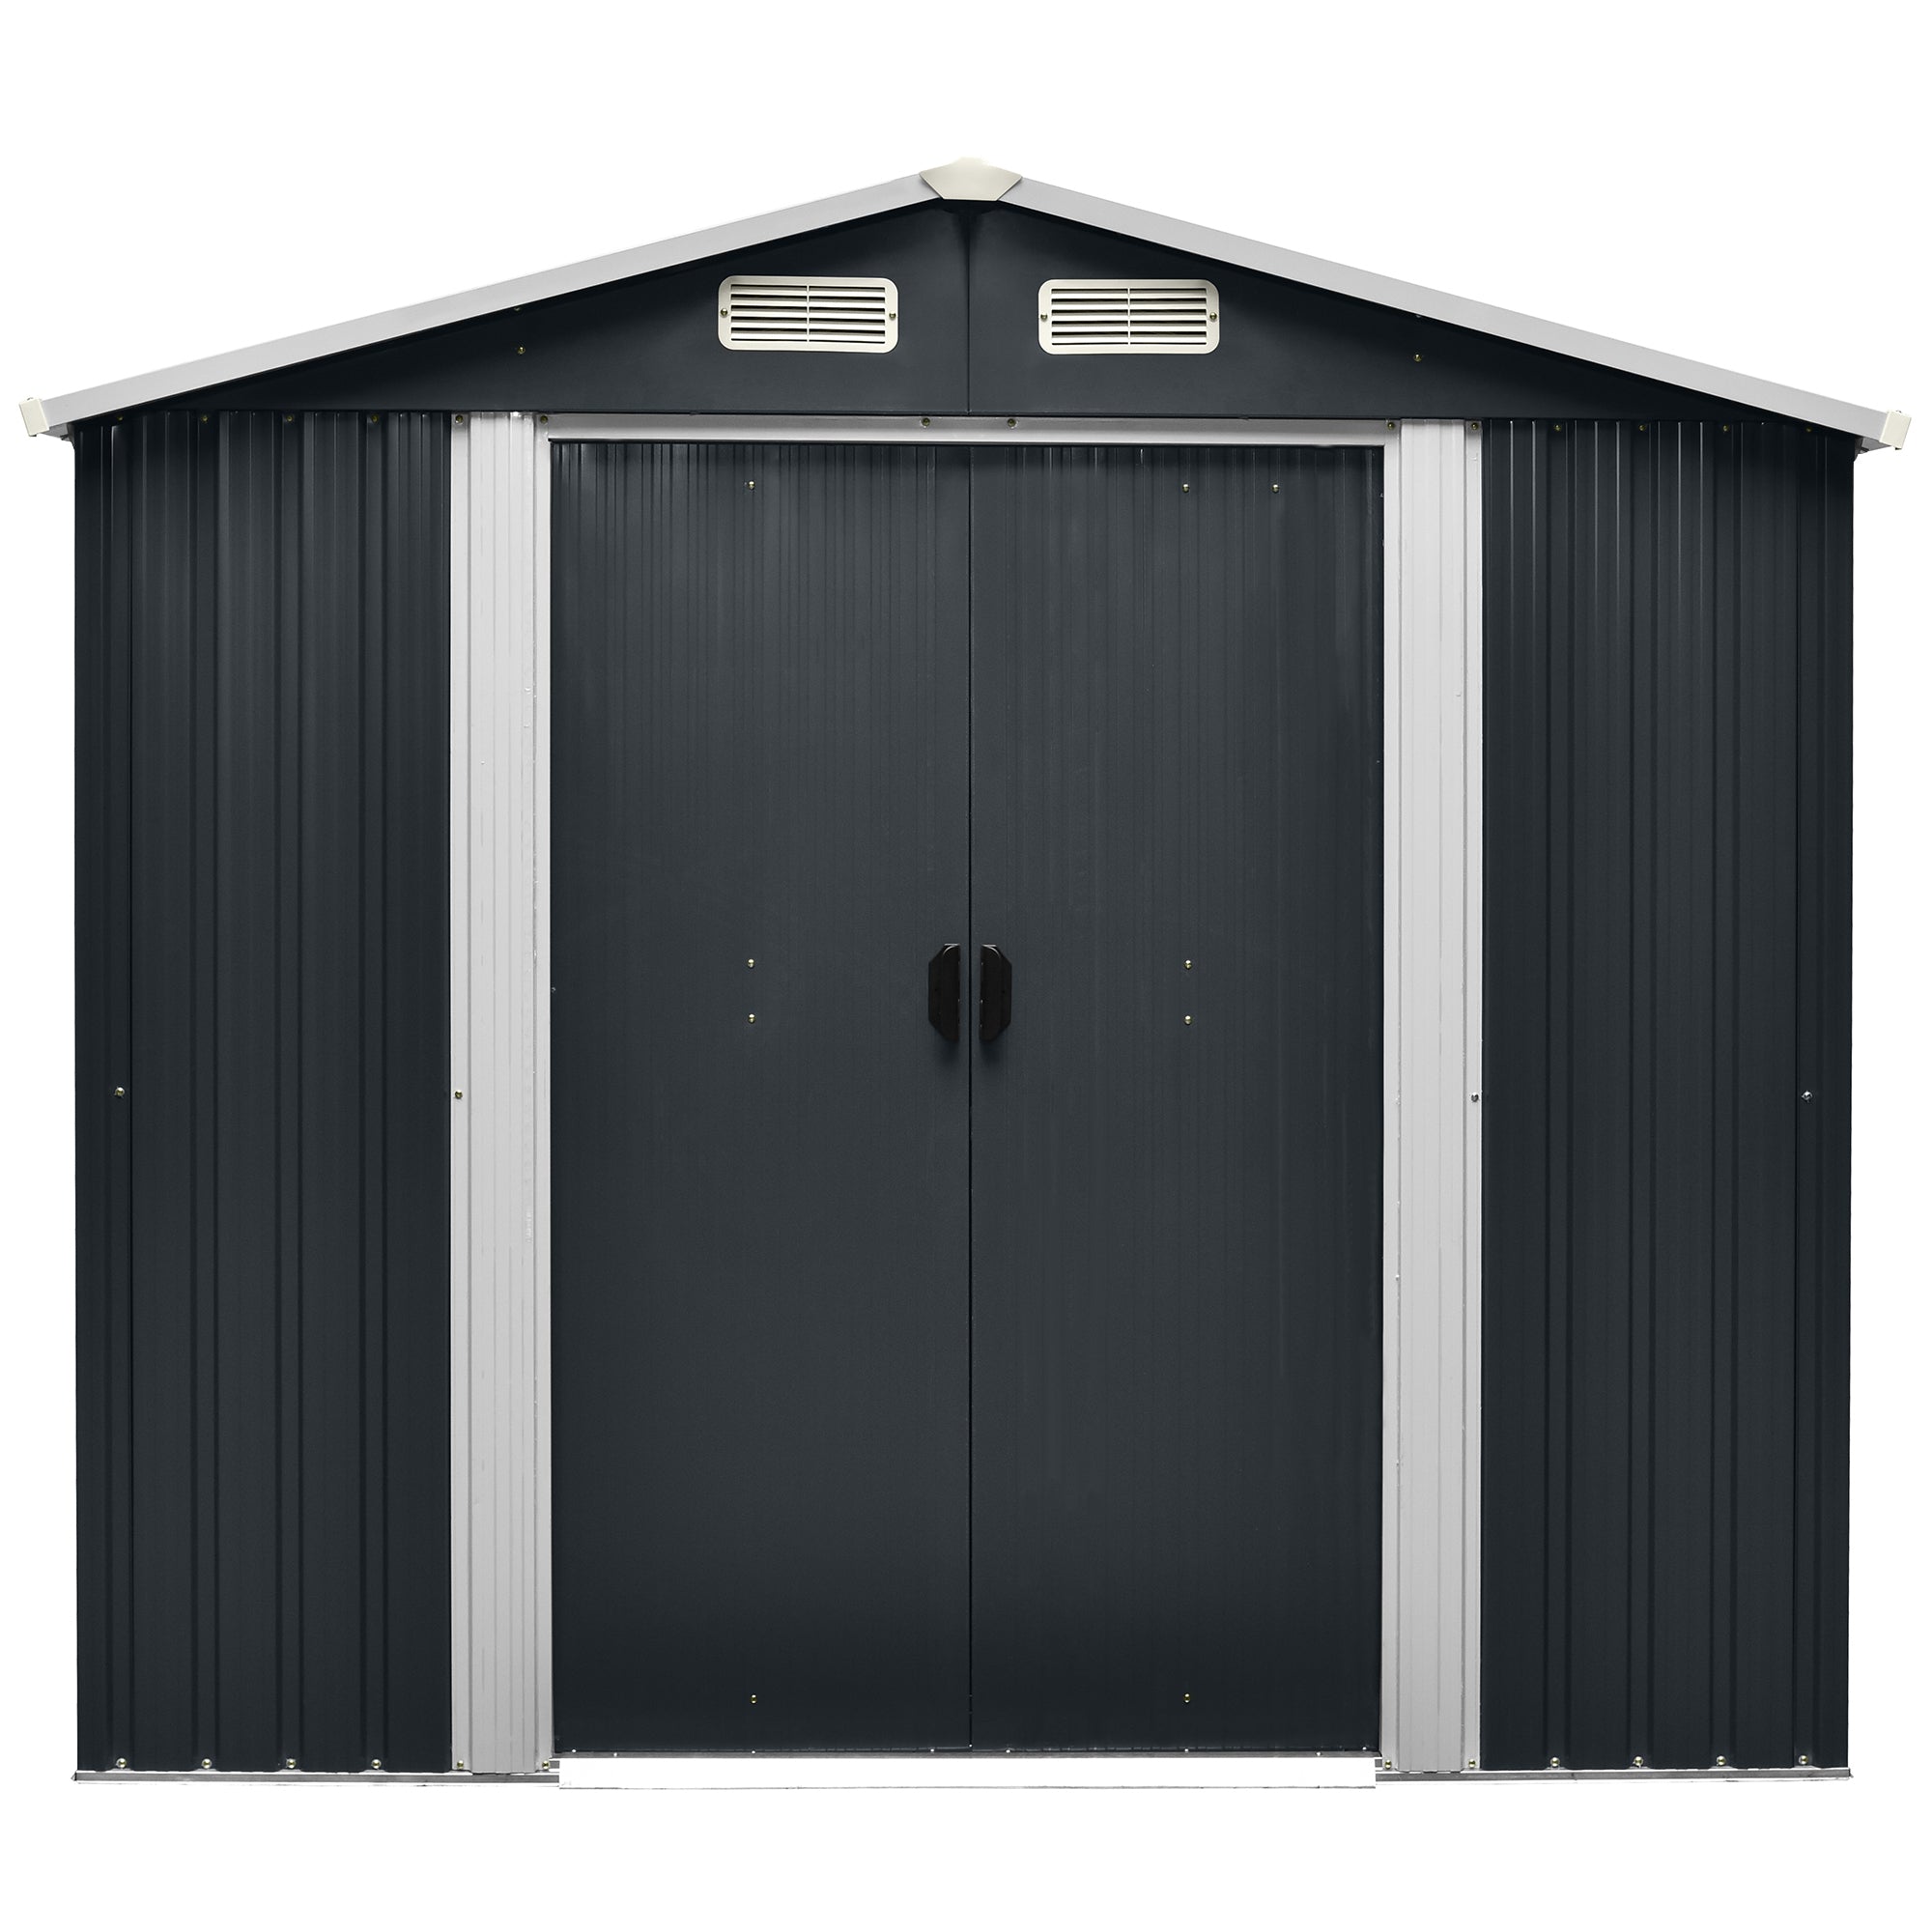 Patio Stash, 9' X 8' Galvanized Steel Garden Shed with 4 Vents & Lockable Double Sliding Door, Utility Tool Shed Storage House for Backyard, Patio, Lawn